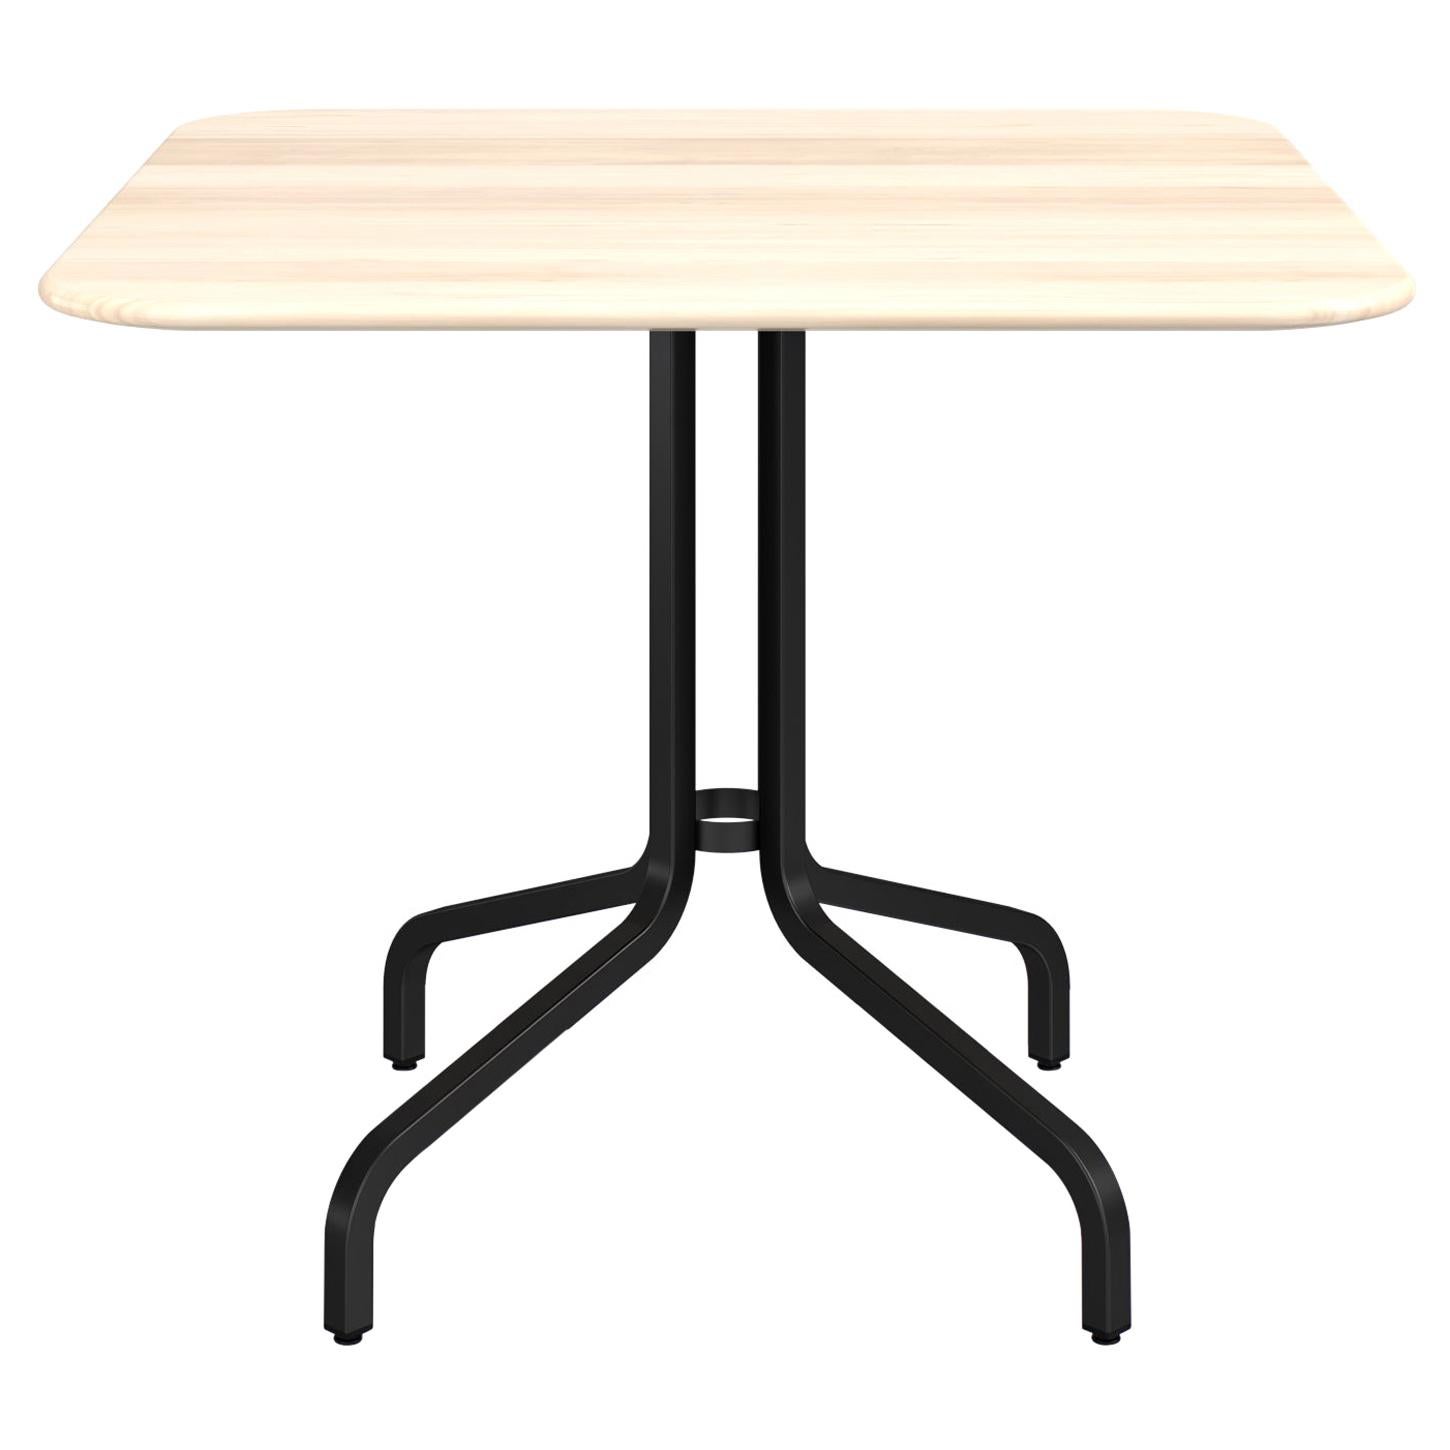 Emeco 1 Inch Large Cafe Table with Black Legs & Wood Top by Jasper Morrison